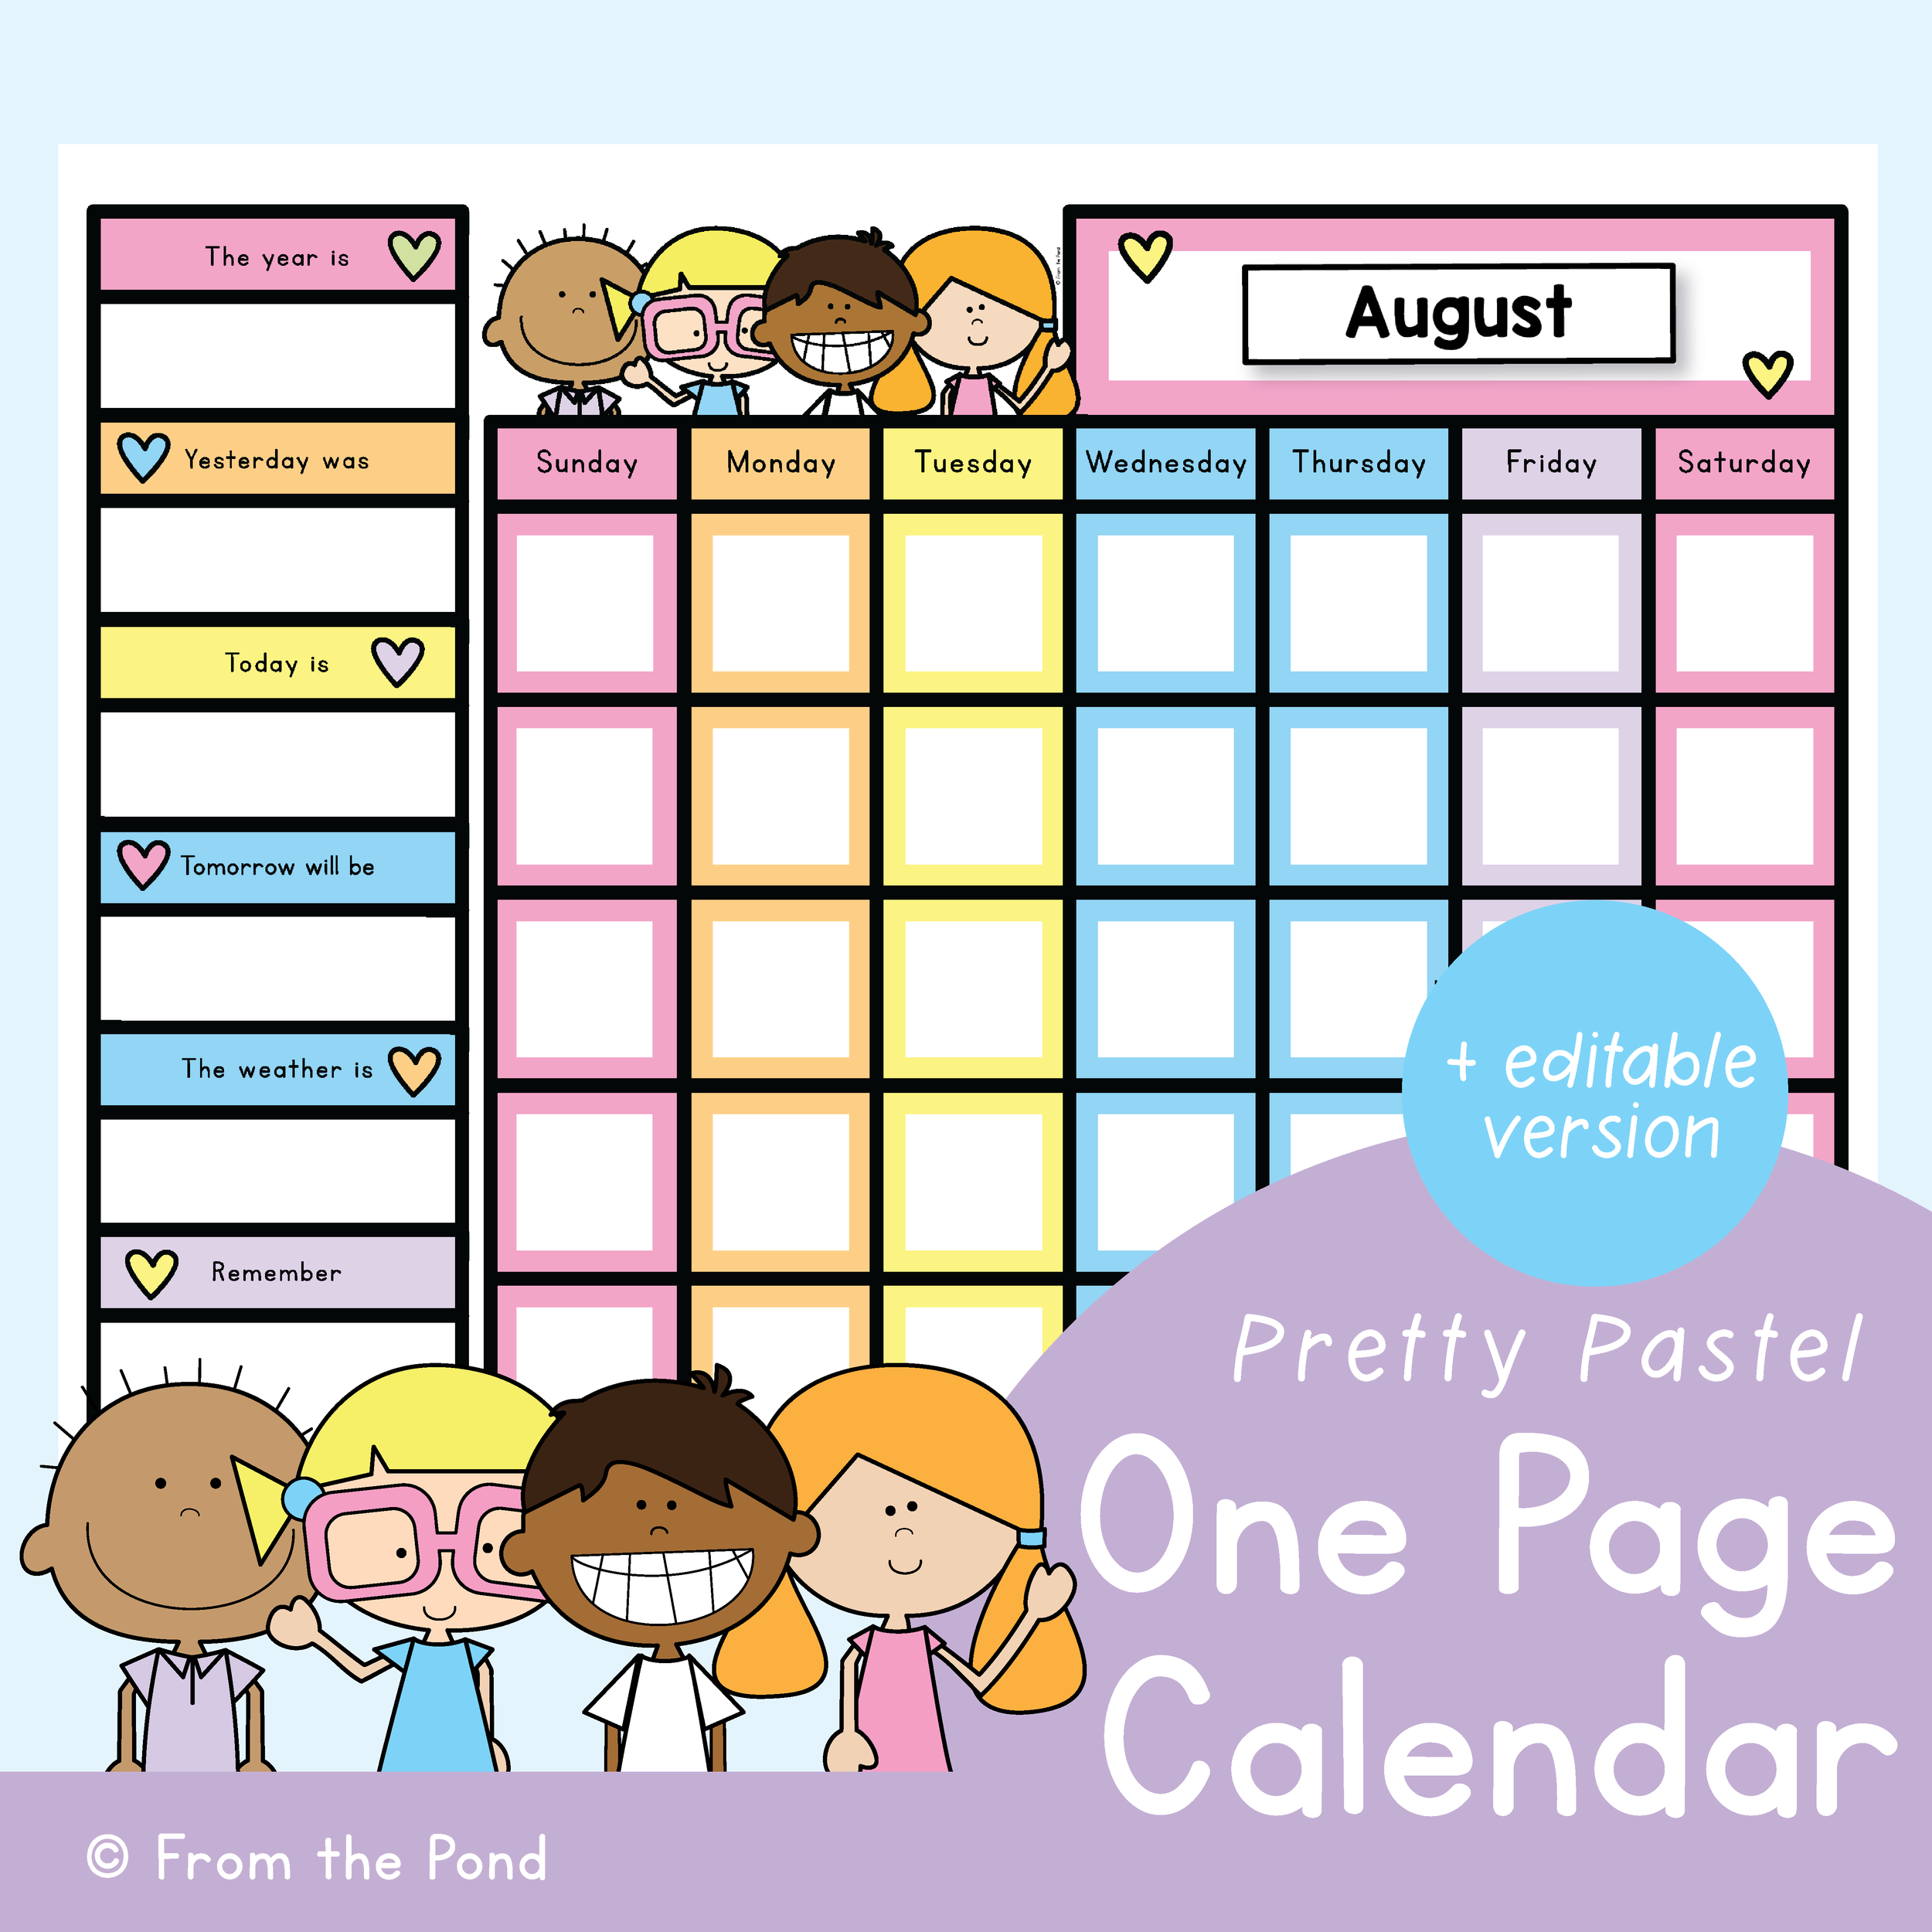 One Page Calendar